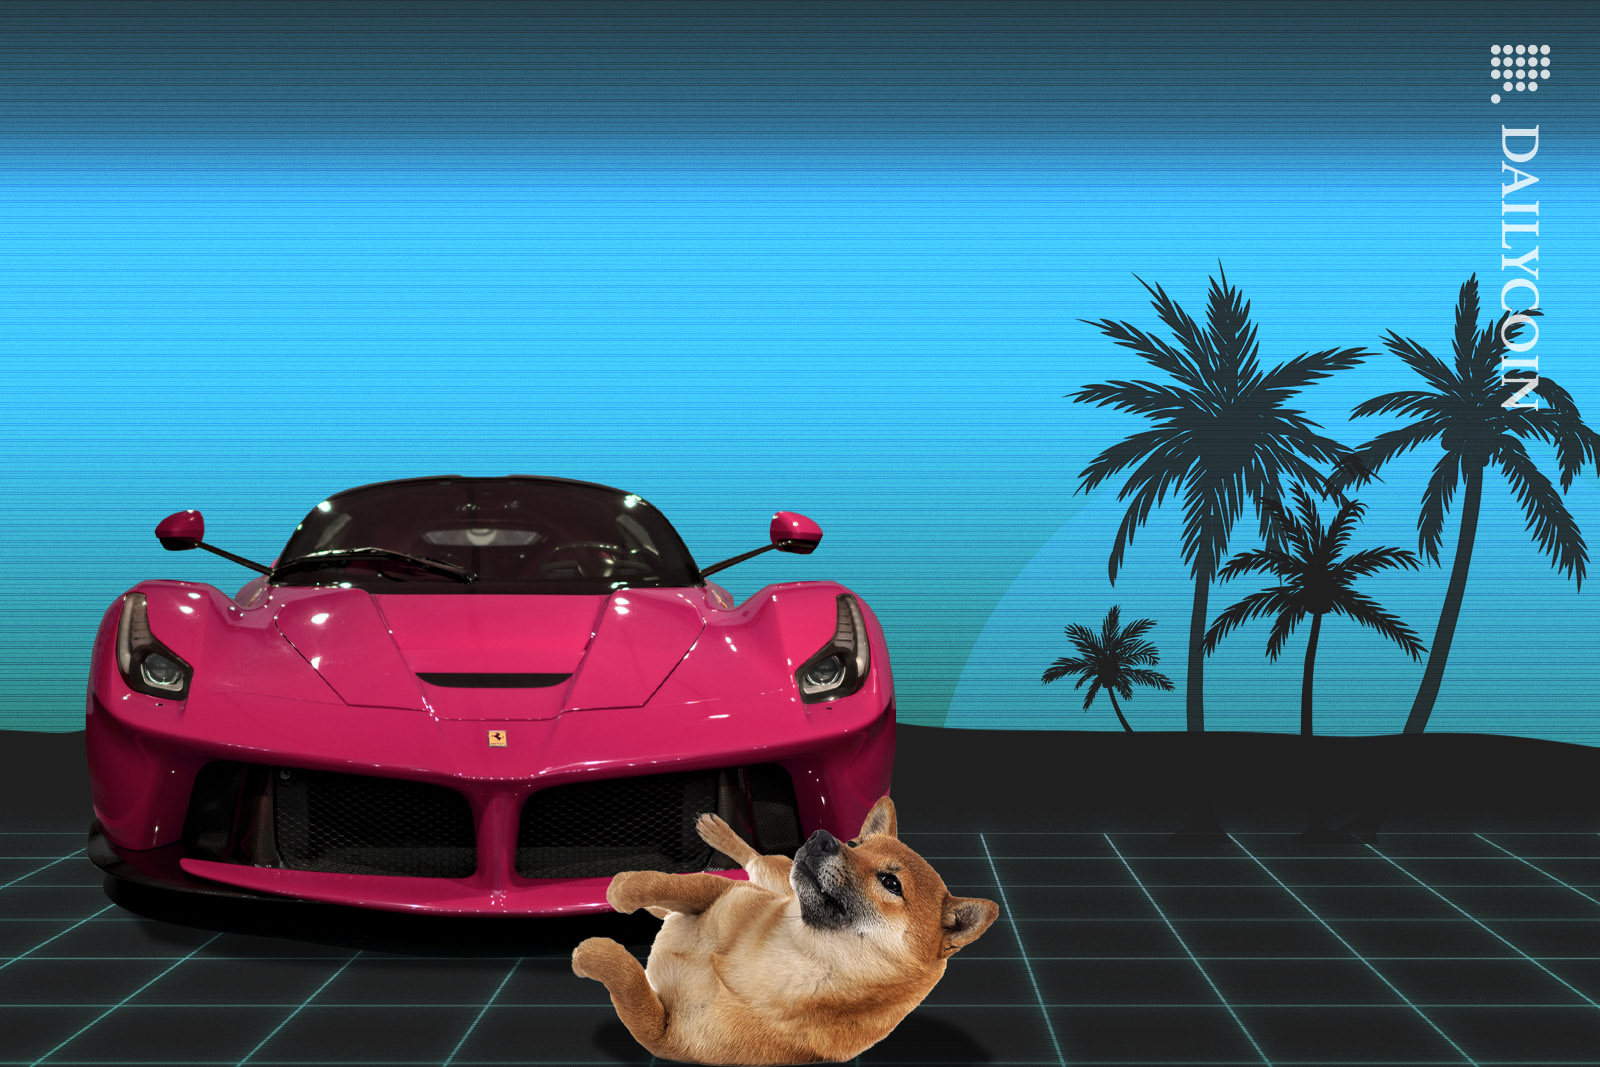 Shiba Inu laying infront of a pink Ferrari in an 80s set.